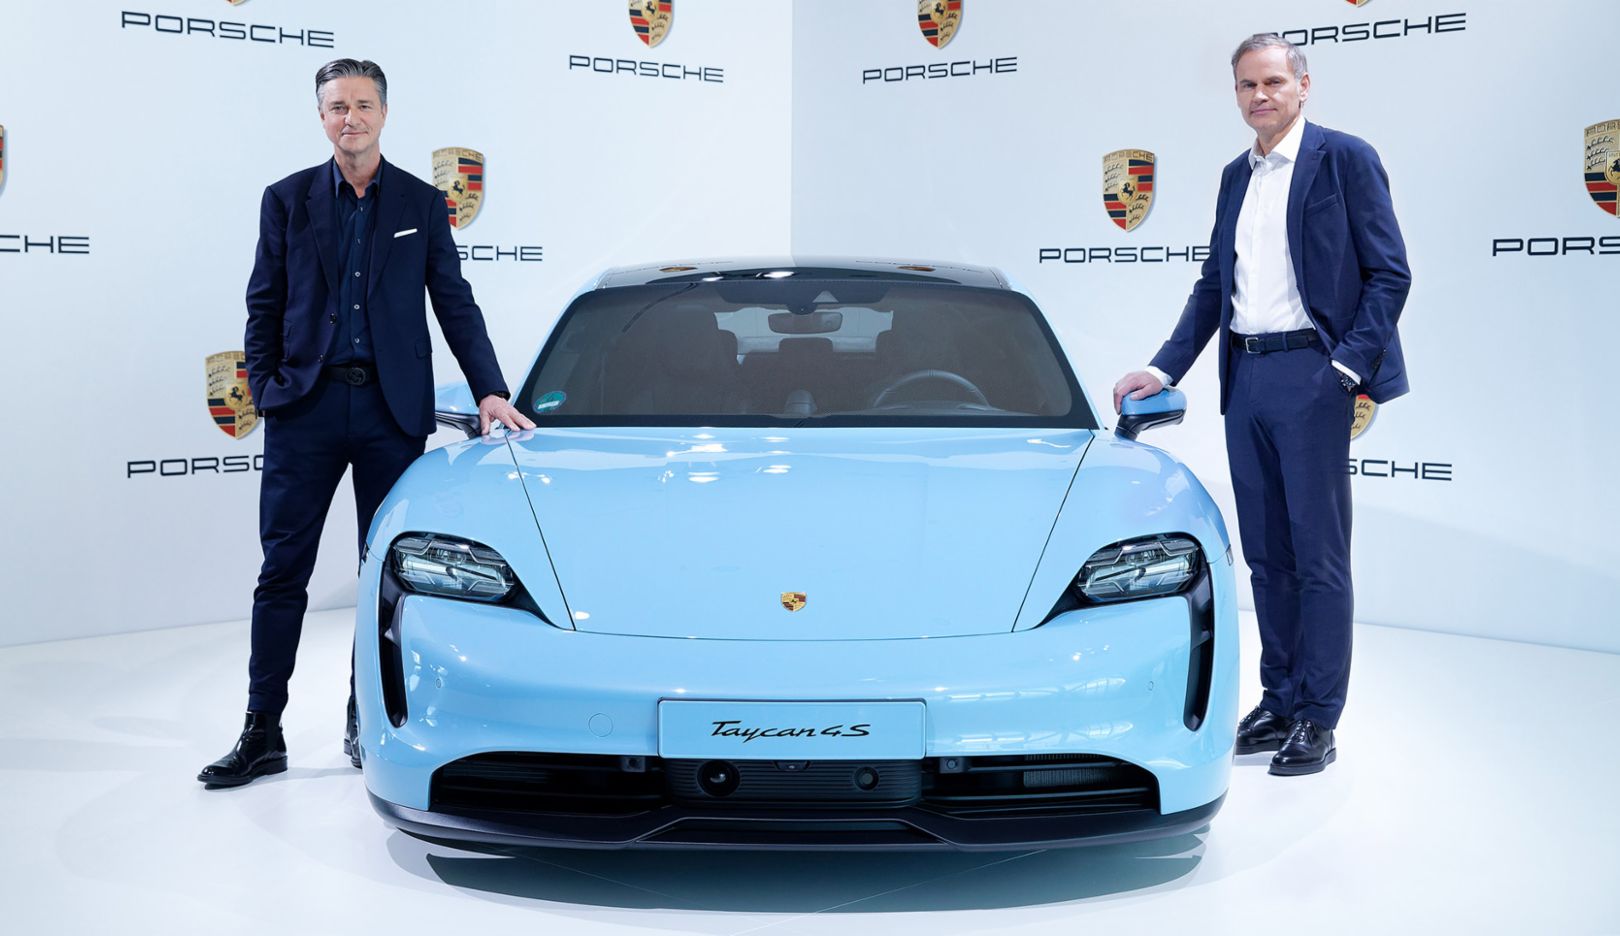 Highlight cut: The annual press conference of Porsche AG